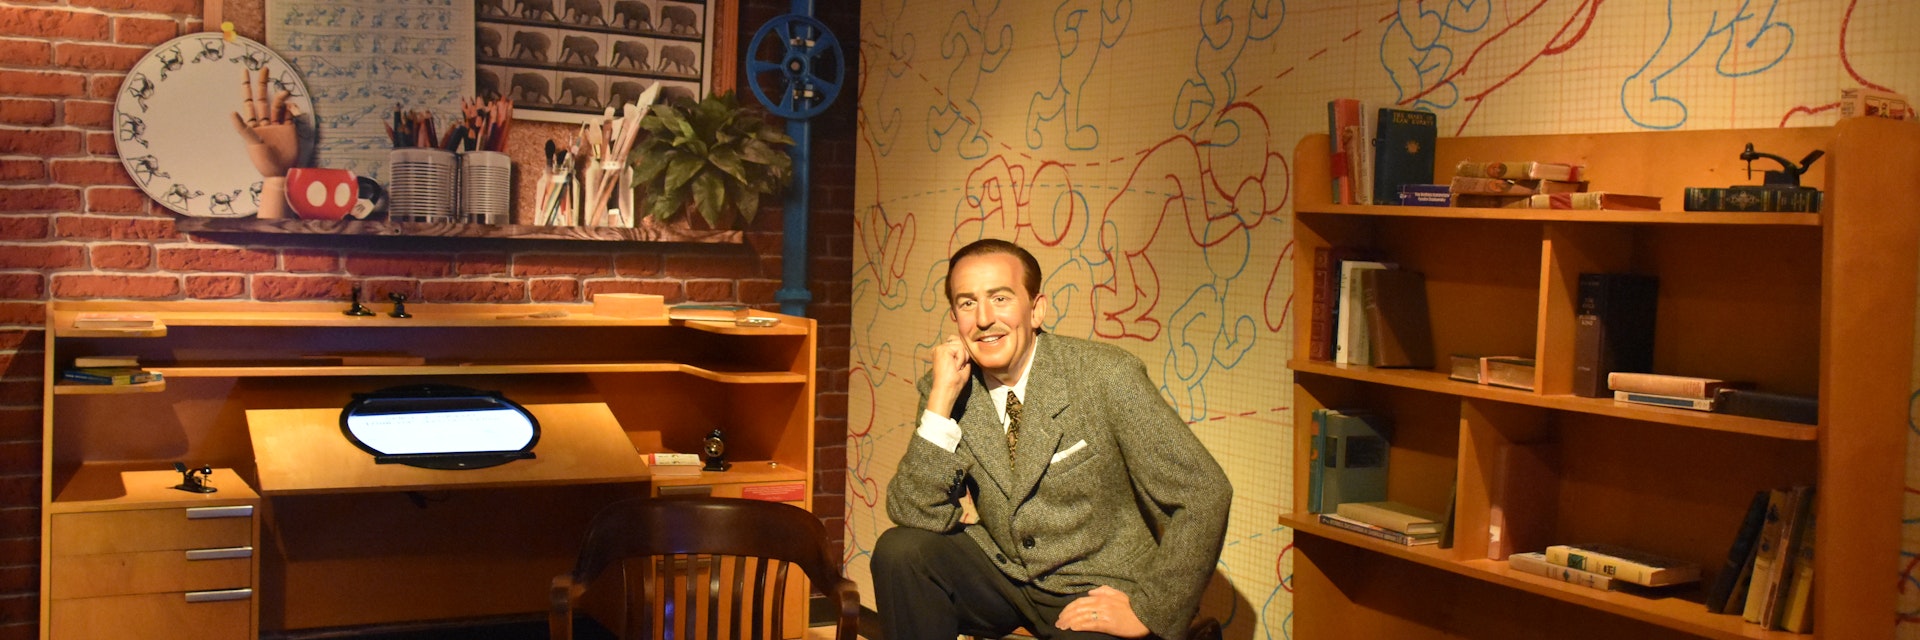 ORLANDO, FL – NOV 24: Walt Disney at Madame Tussauds Wax Museum in Orlando, Florida, on Nov 24, 2019.  It displays waxworks of historical figures, film and TV characters and sports personalities.; Shutterstock ID 1734020693; full: 65050; gl: Online editorial; netsuite: POI updates; your: Ann Douglas Lott
1734020693